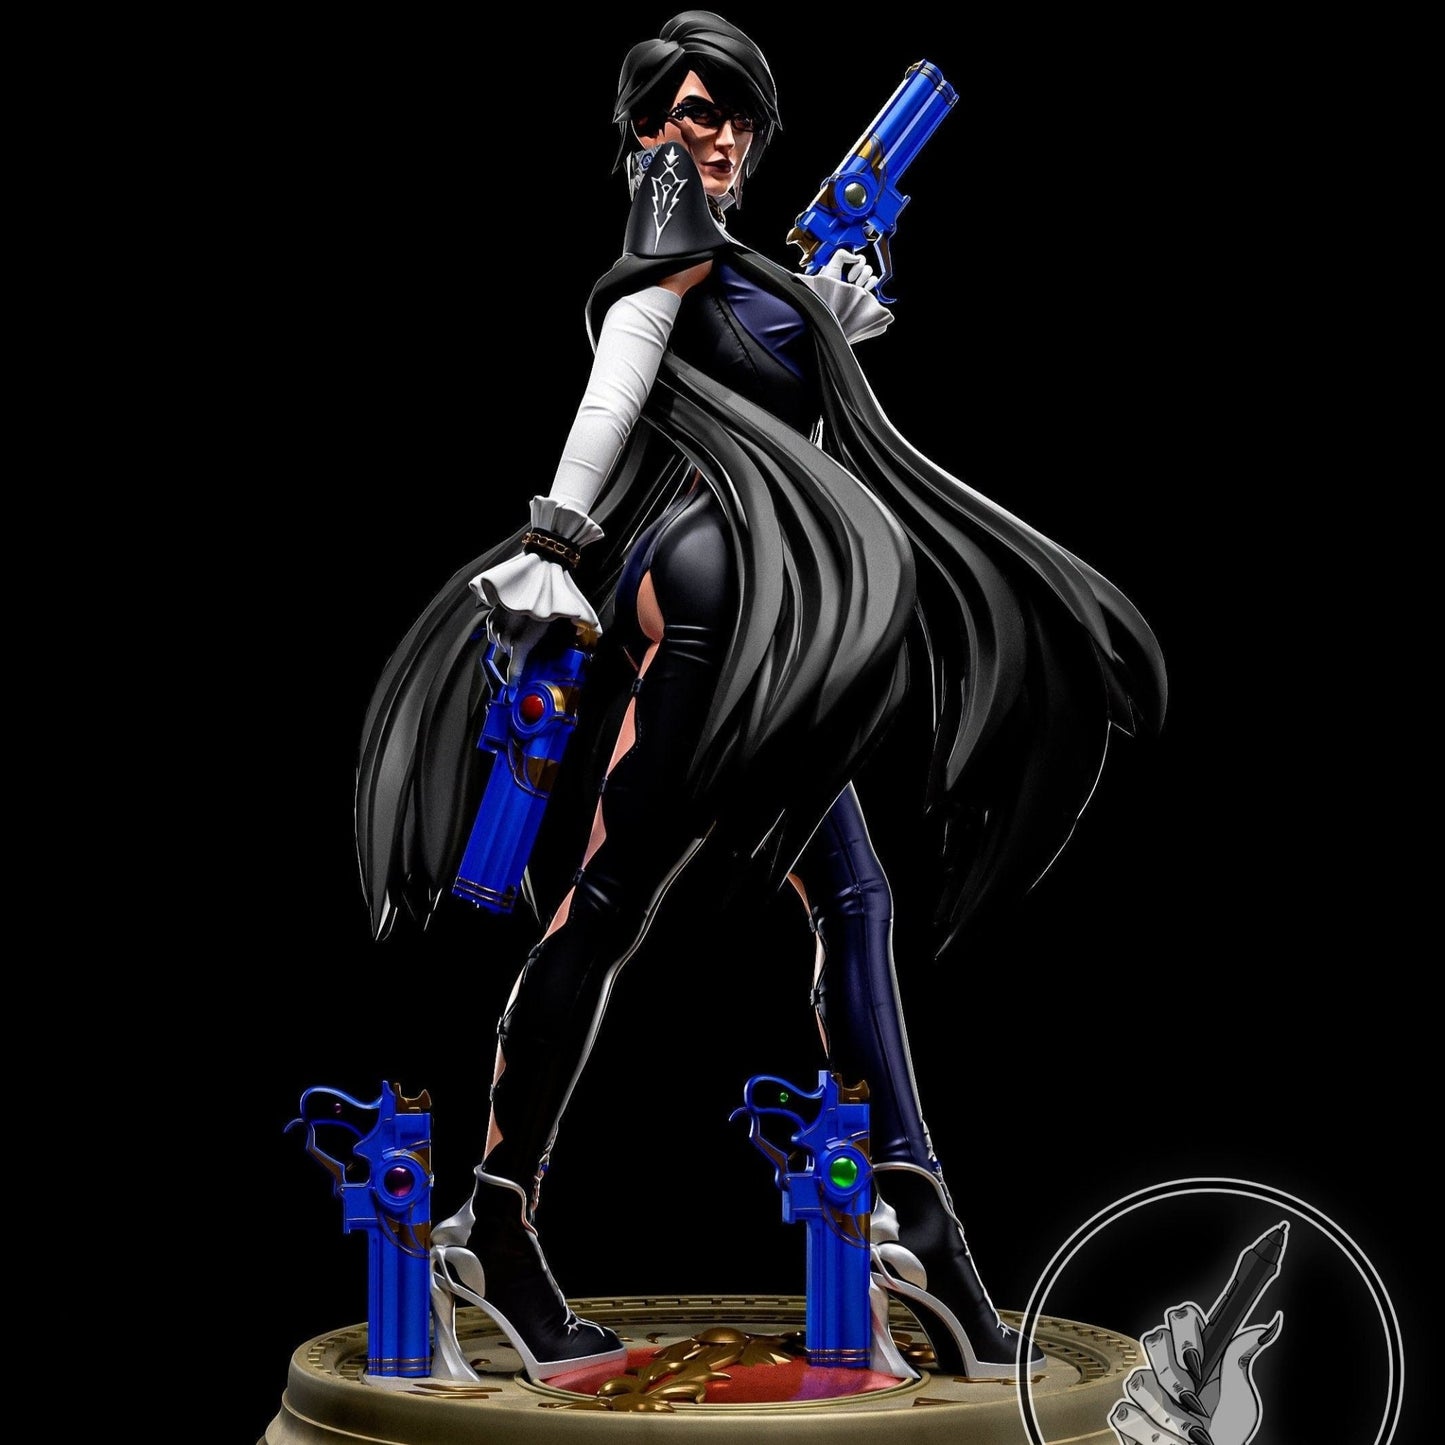 Bayonetta 3D printed miniatures figurines collectibles and scale models UNPAINTED Fun Art by h3LL creator